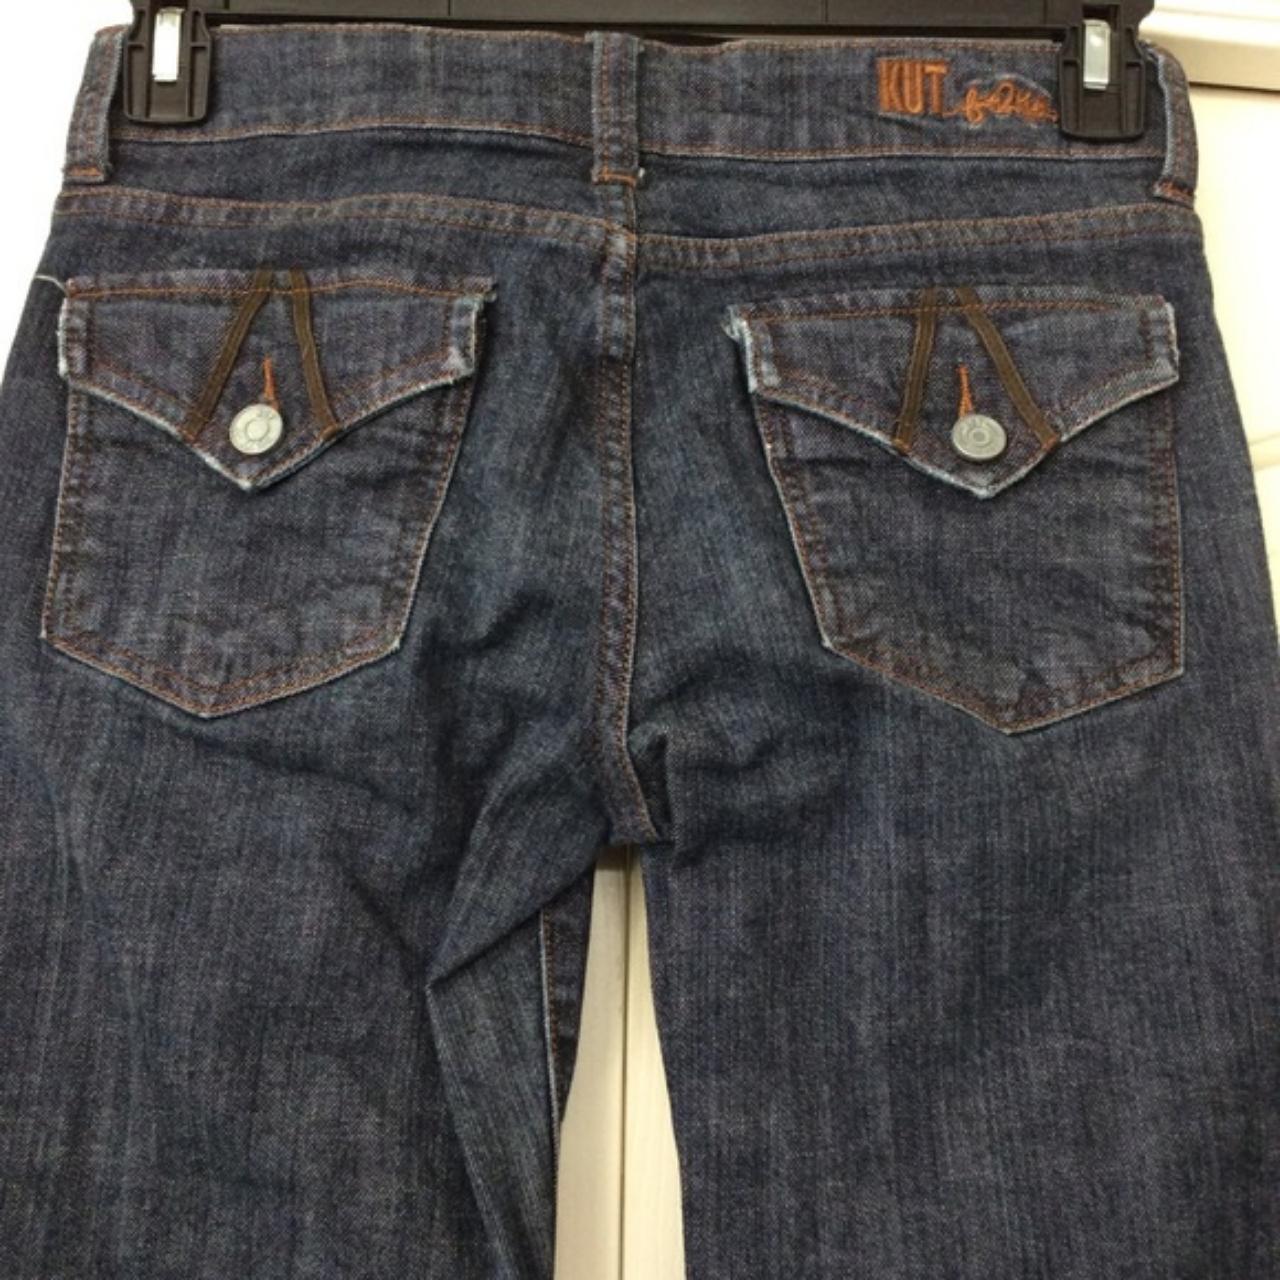 Kut from the Kloth Women's Blue Jeans (4)